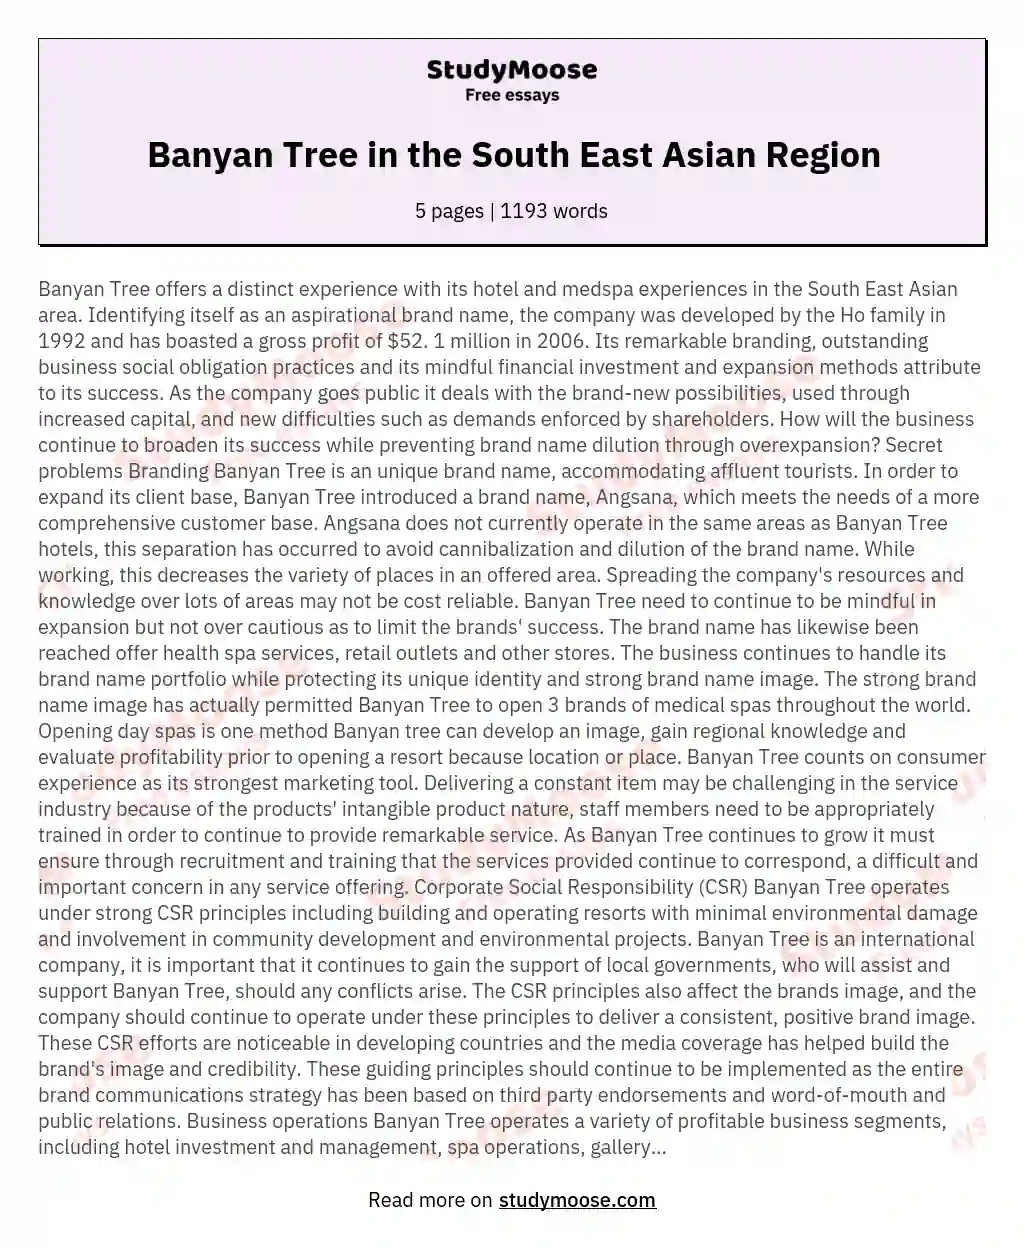 Banyan Tree in the South East Asian Region essay